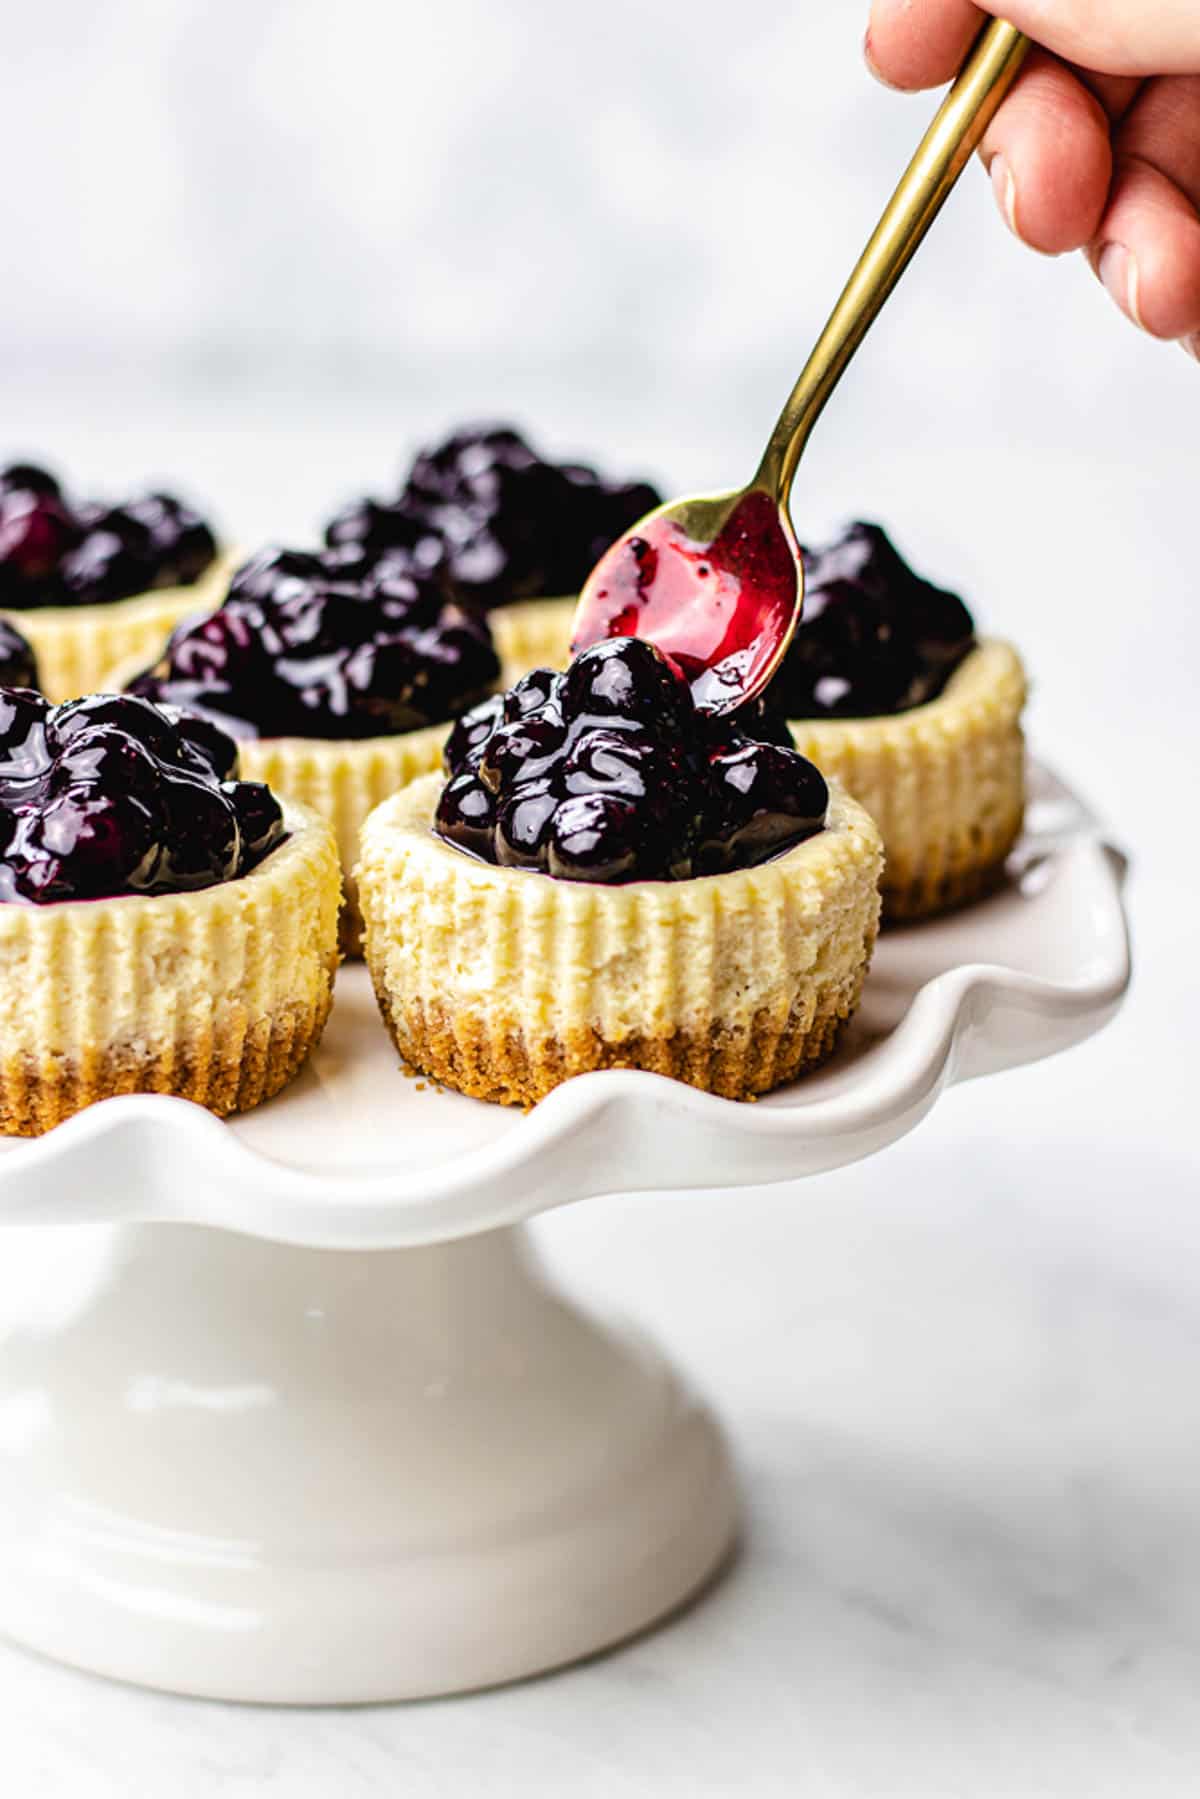 seven mini cheesecakes with blueberry sauce on a white cake plate.